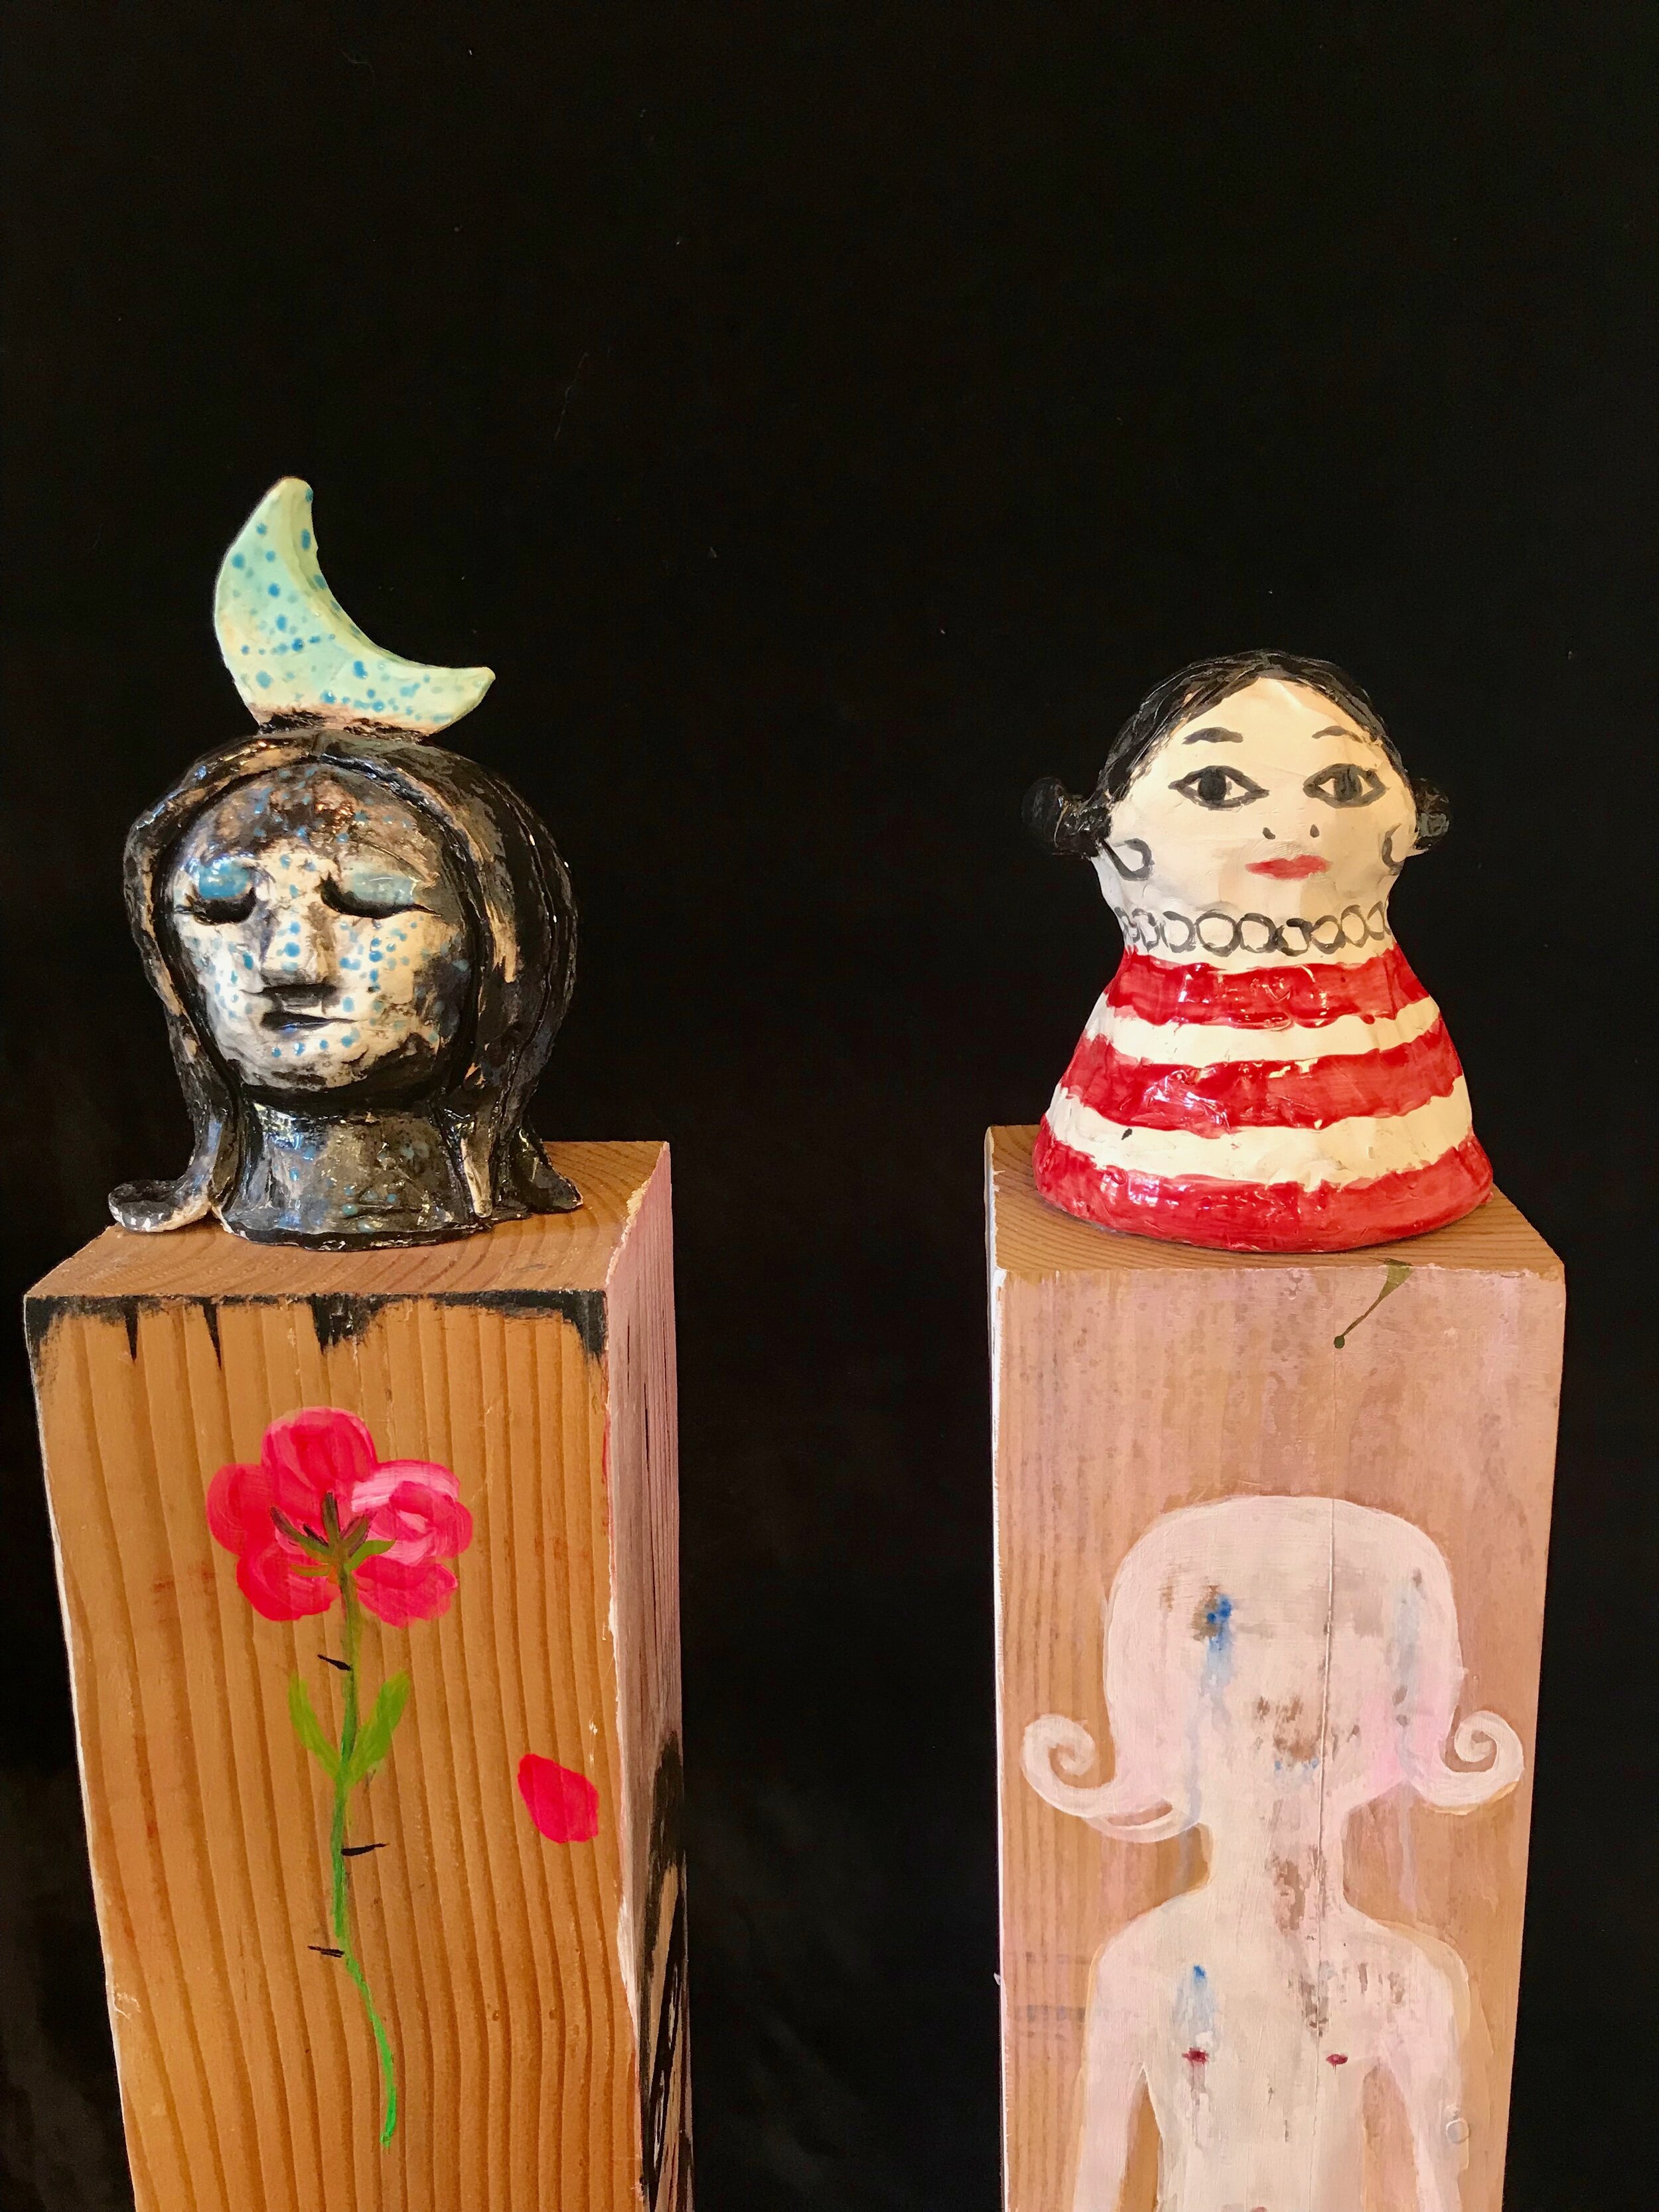 Installation of "Family Totems"